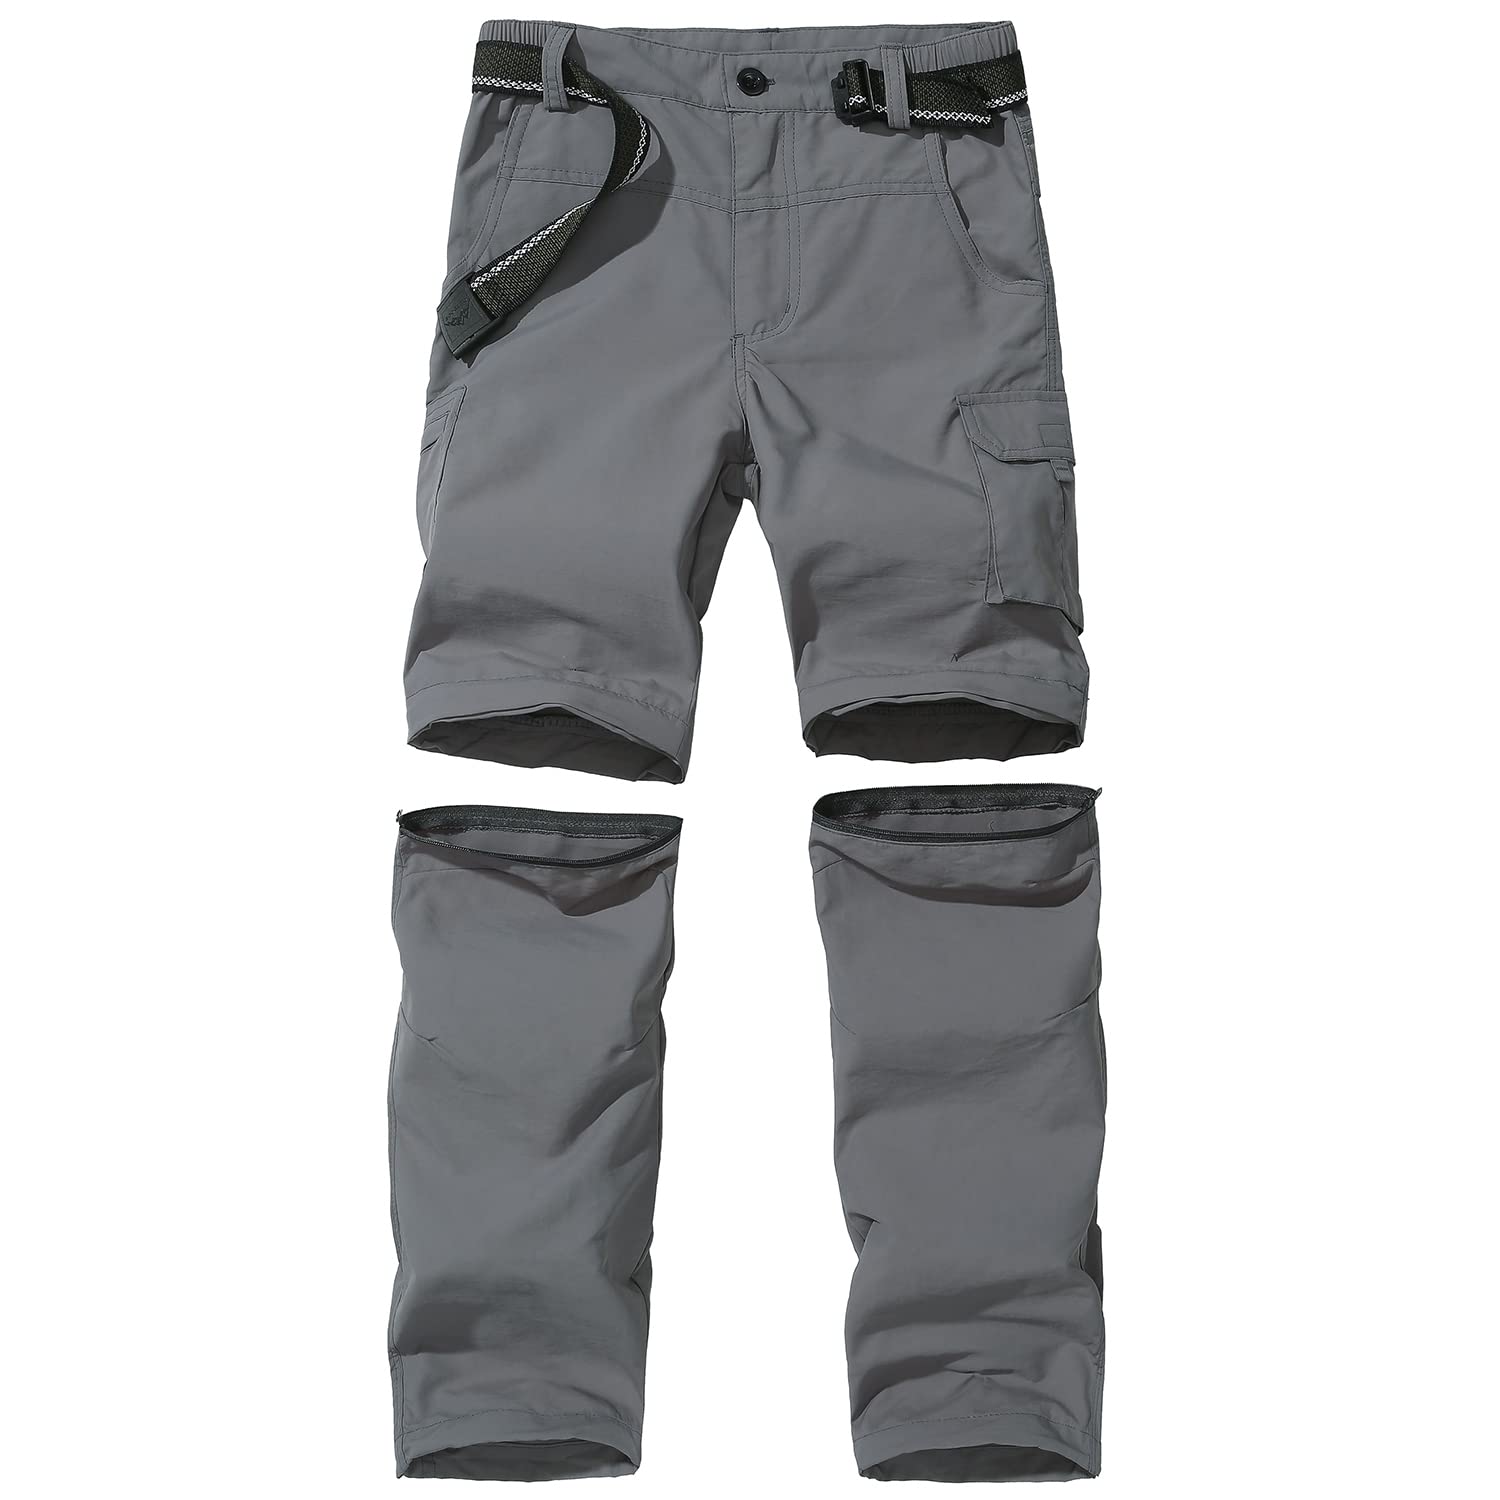 Jomlun Boys Hiking Pants Kids Cargo Outdoor Casual Camping Pants Quick Dry Convertible Zip Off Trousers Gray